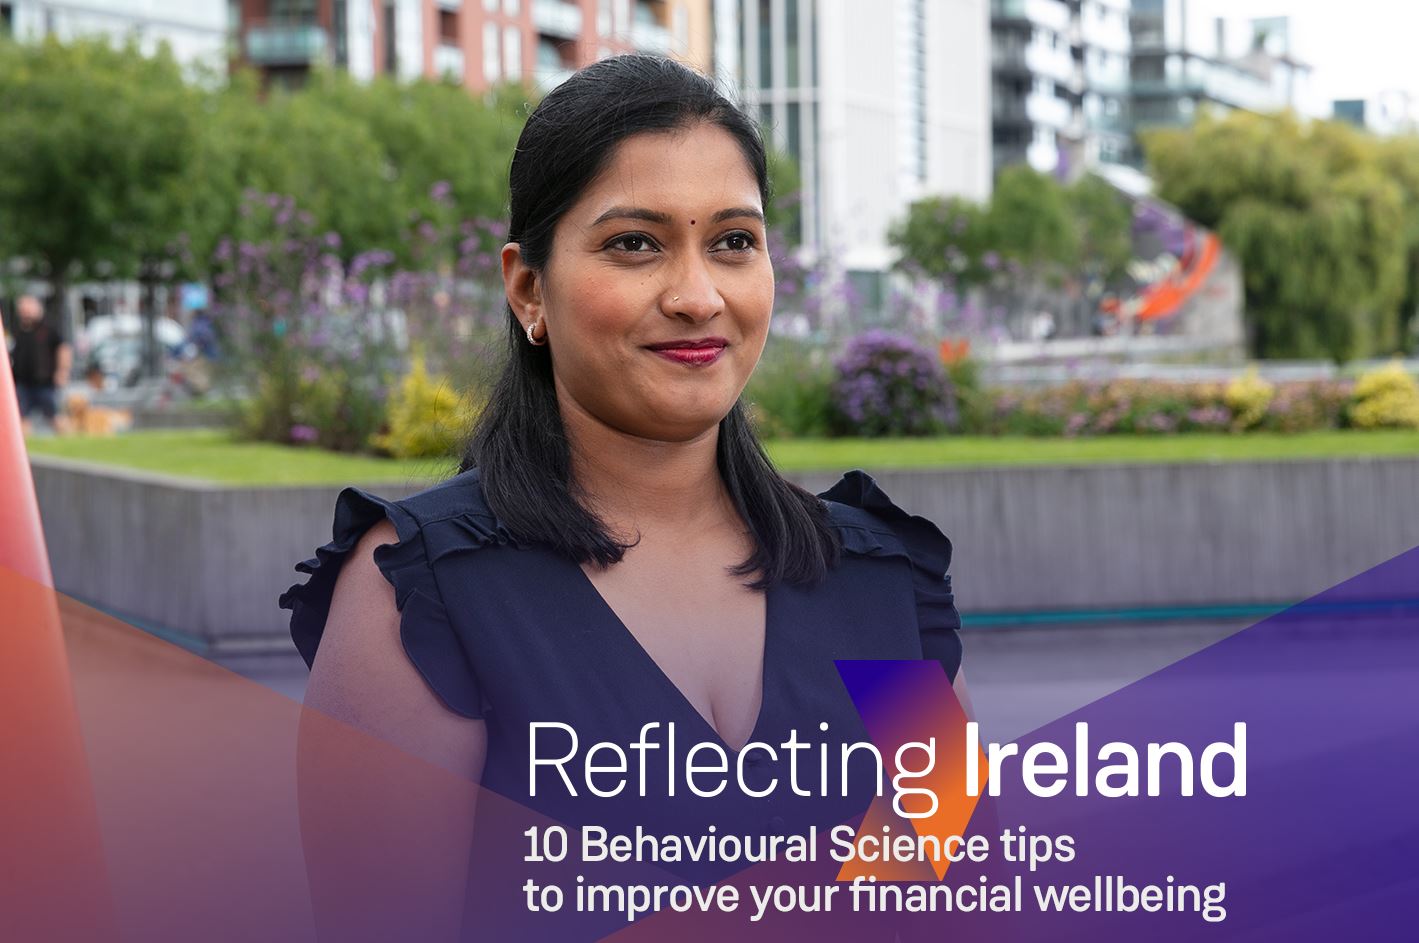 Reflecting Ireland: Tips on improving your financial wellbeing